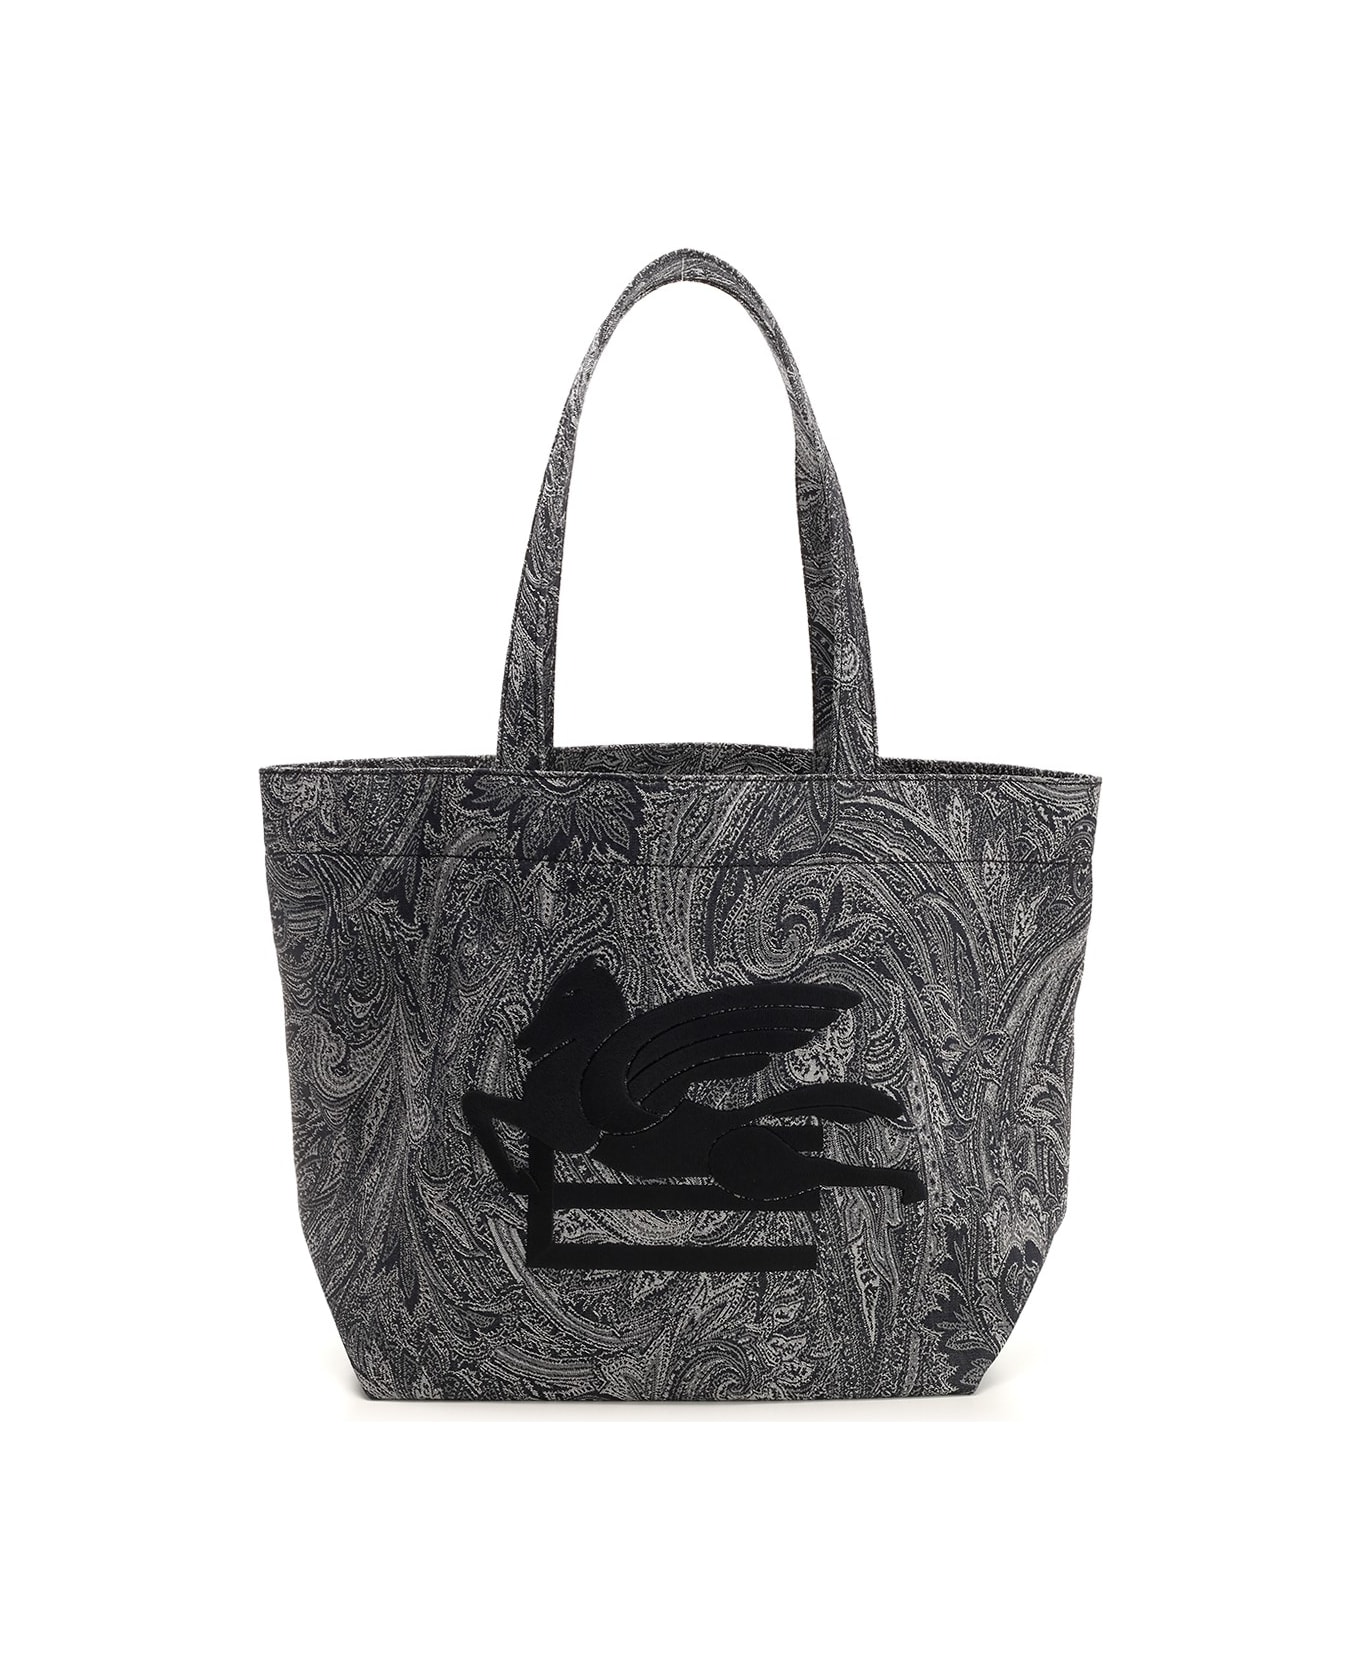 Etro Navy Blue Large Tote Bag With Paisley Jacquard Motif - Blue トートバッグ